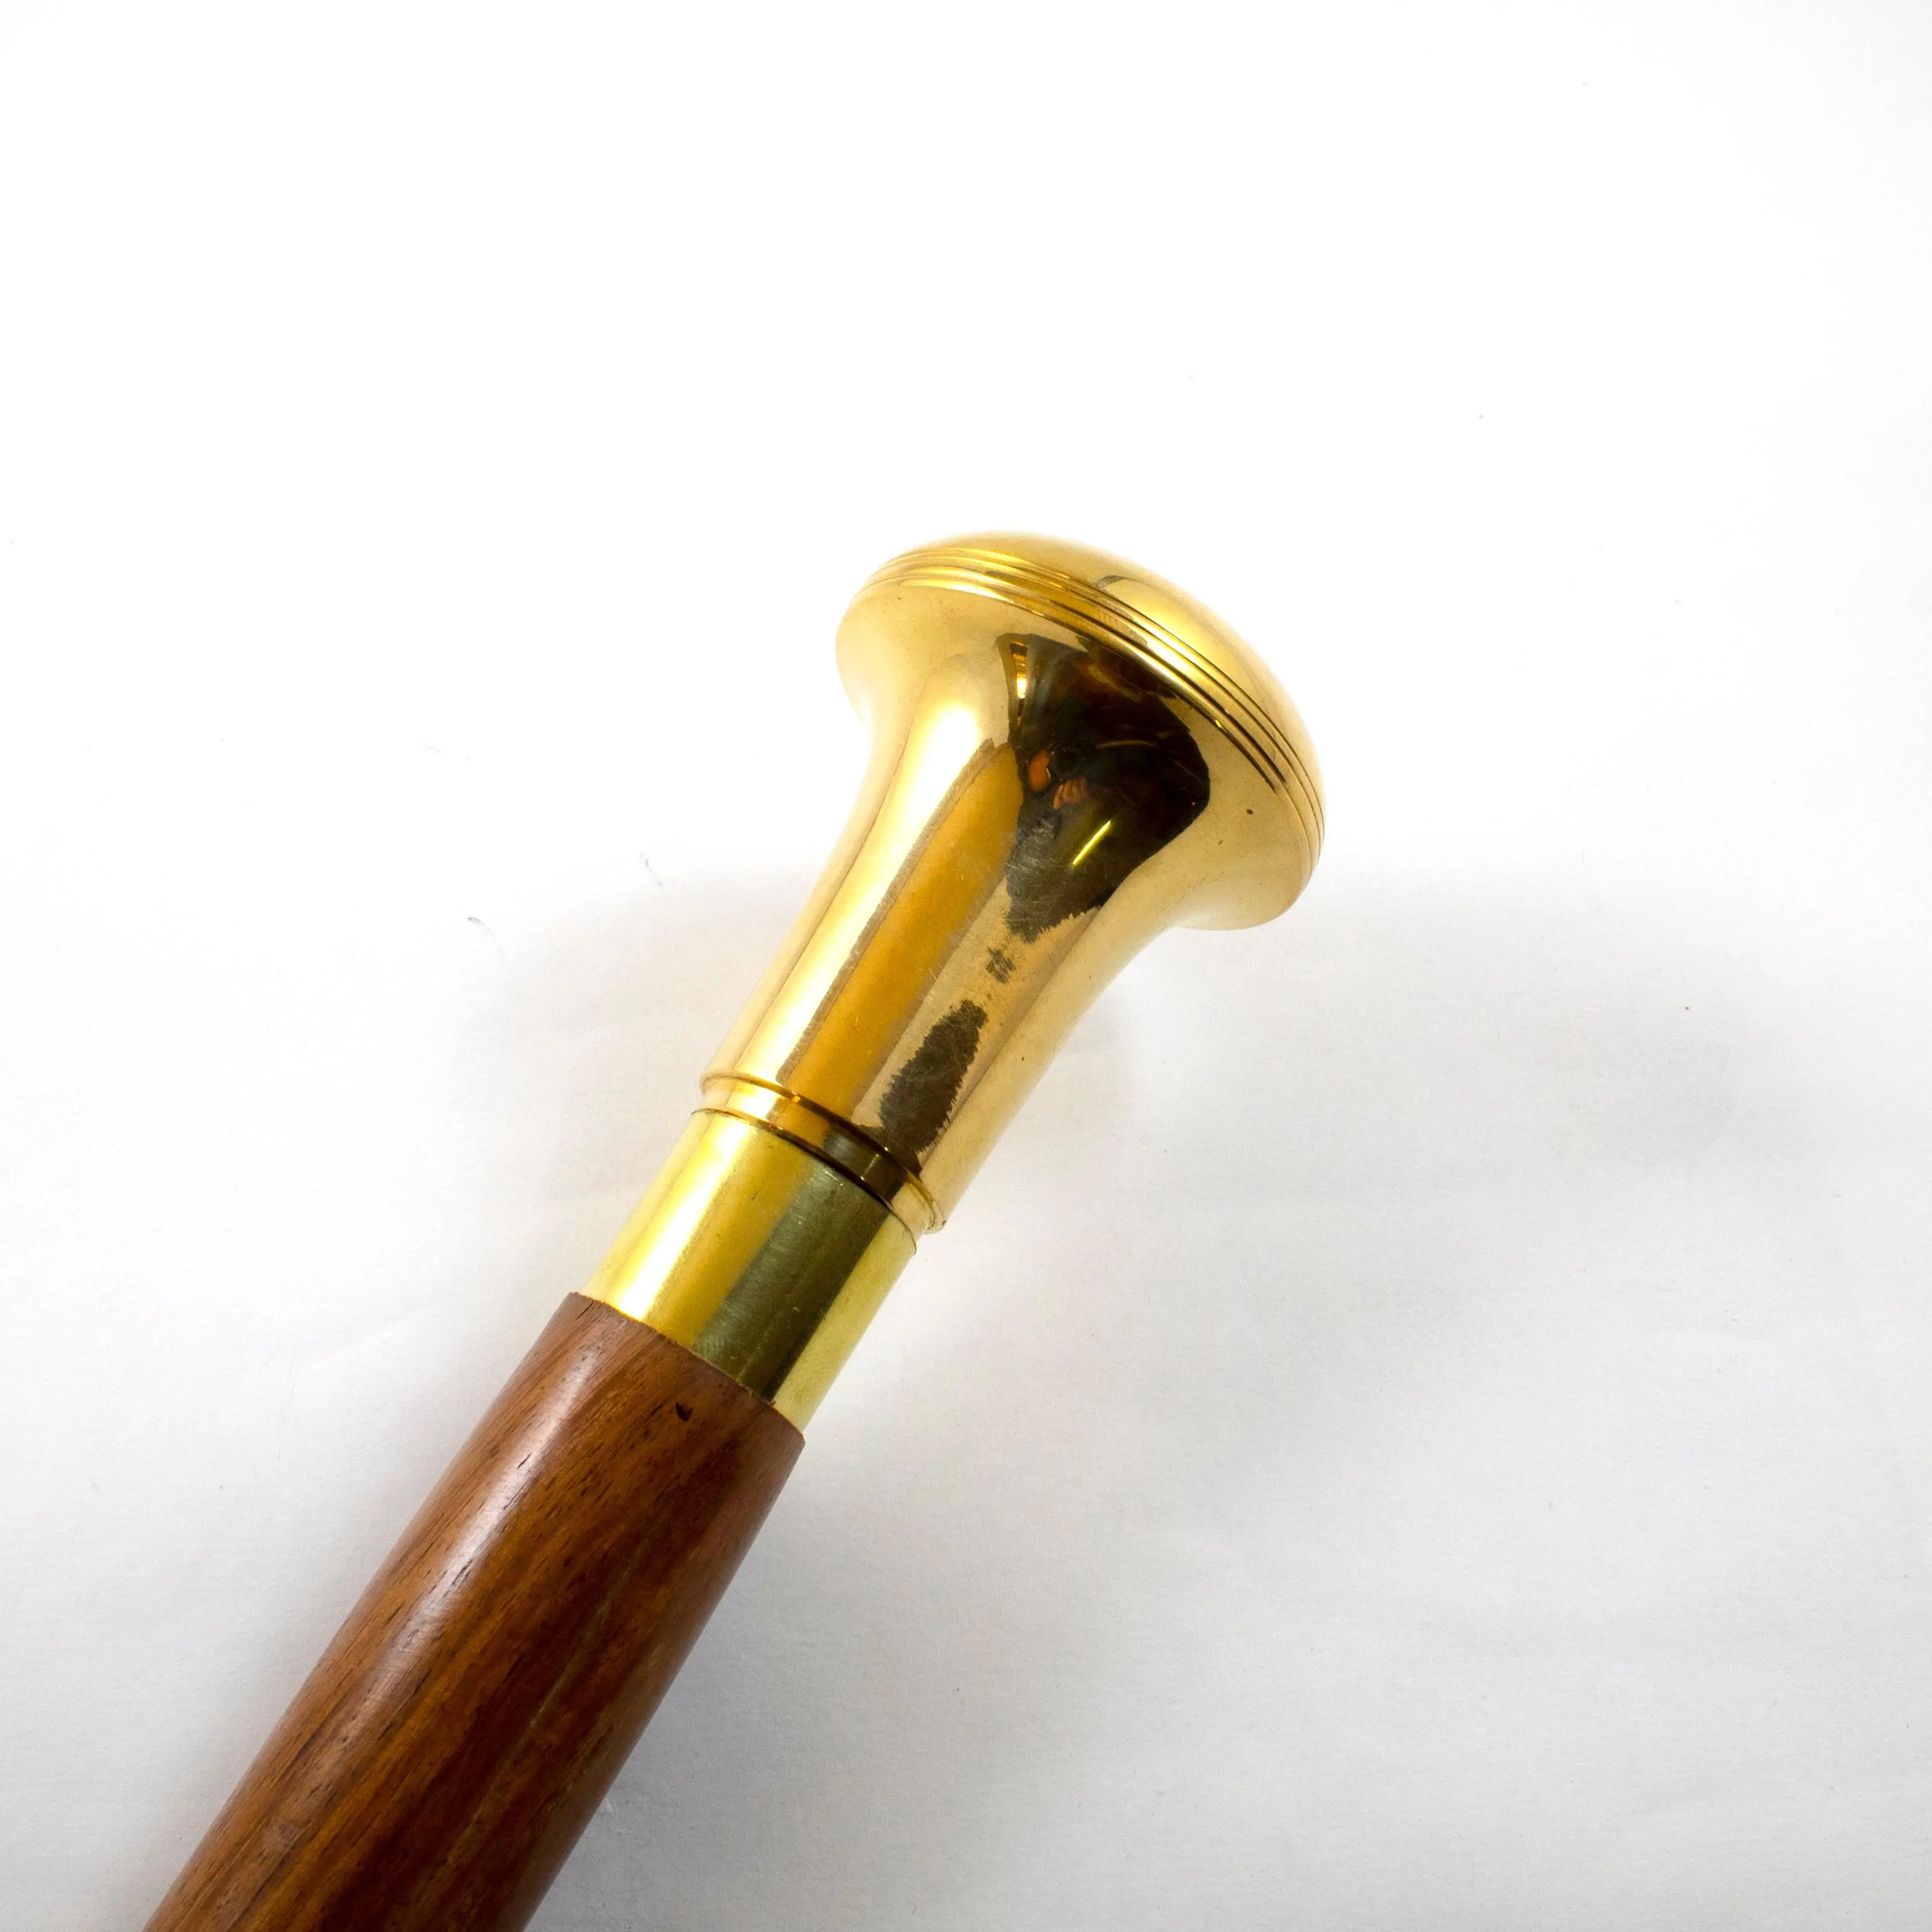 brass knob handle classic handmade carved wooden walking stick polish finished old age men women daily use cane